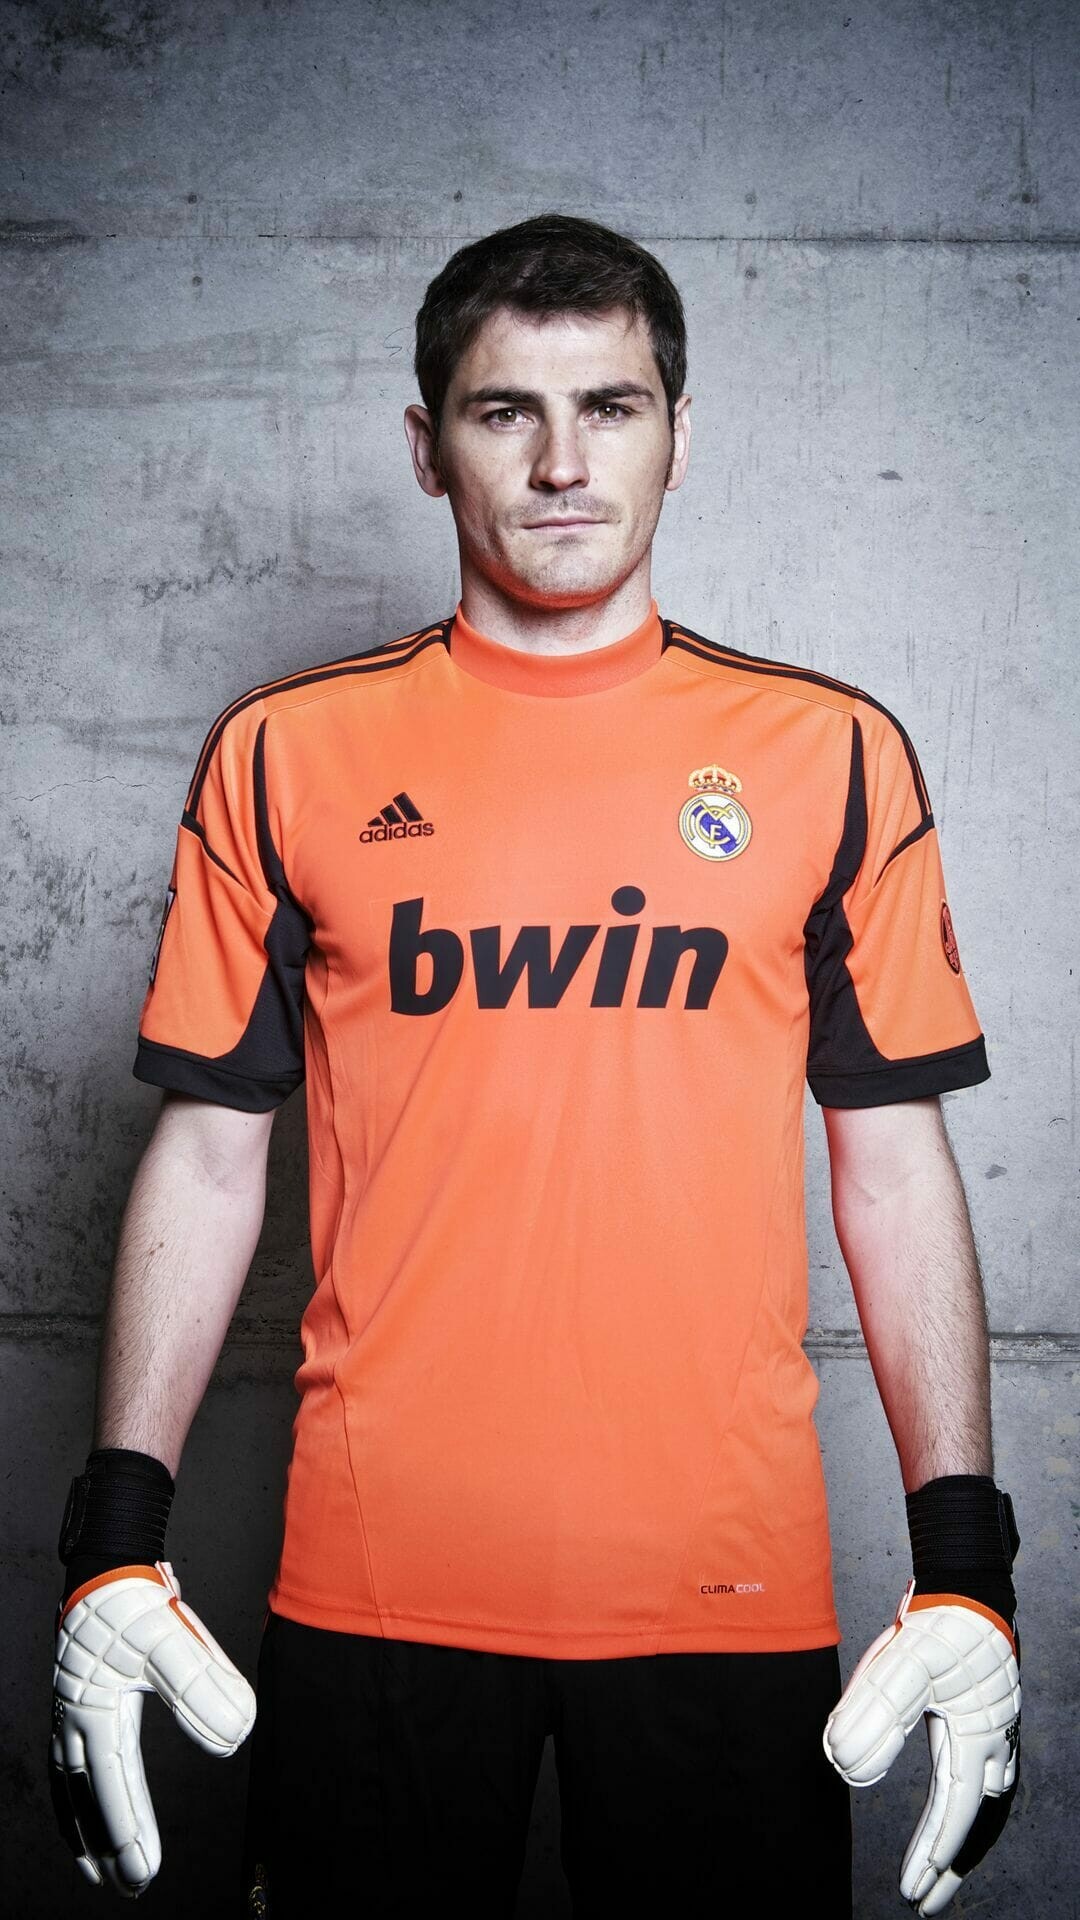 Iker Casillas: Footballer, Started his career with the Real Madrid youth team. 1080x1920 Full HD Wallpaper.